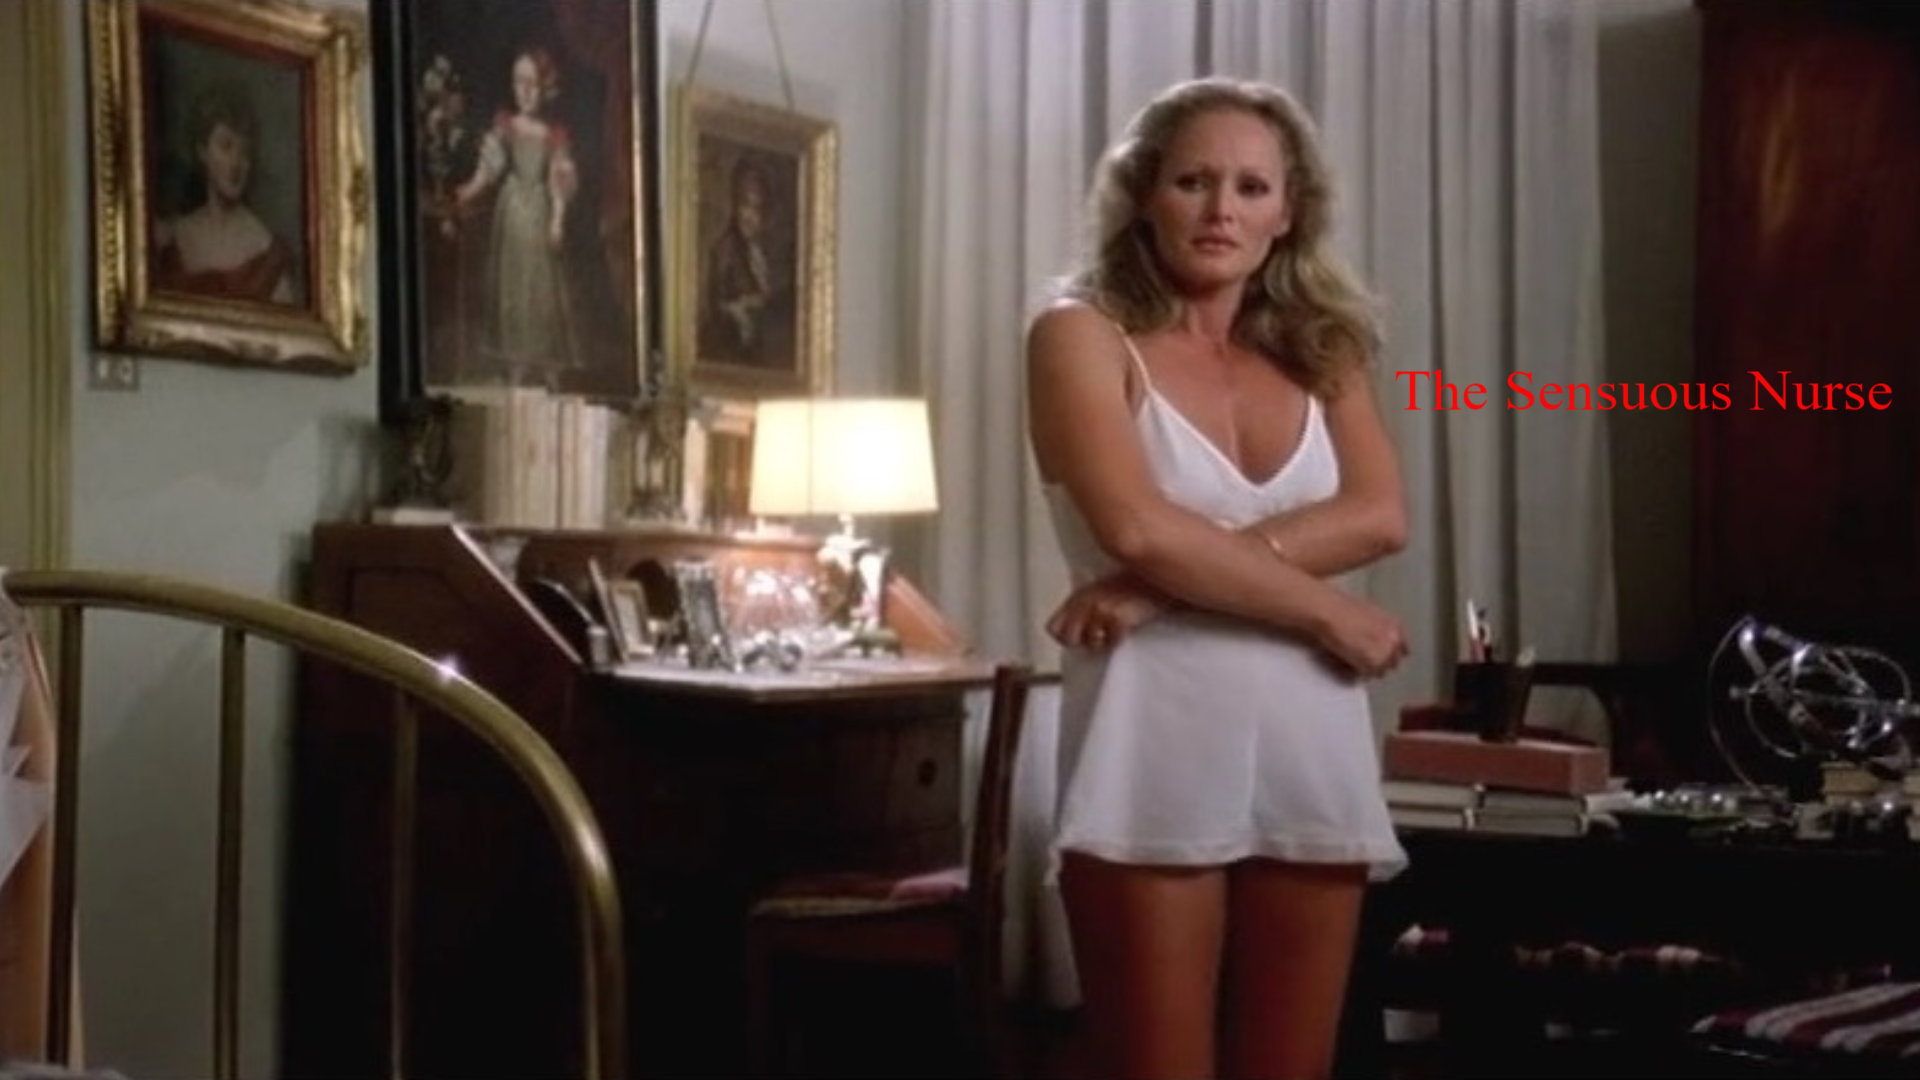 curtis ong recommends Ursula Andress The Sensuous Nurse